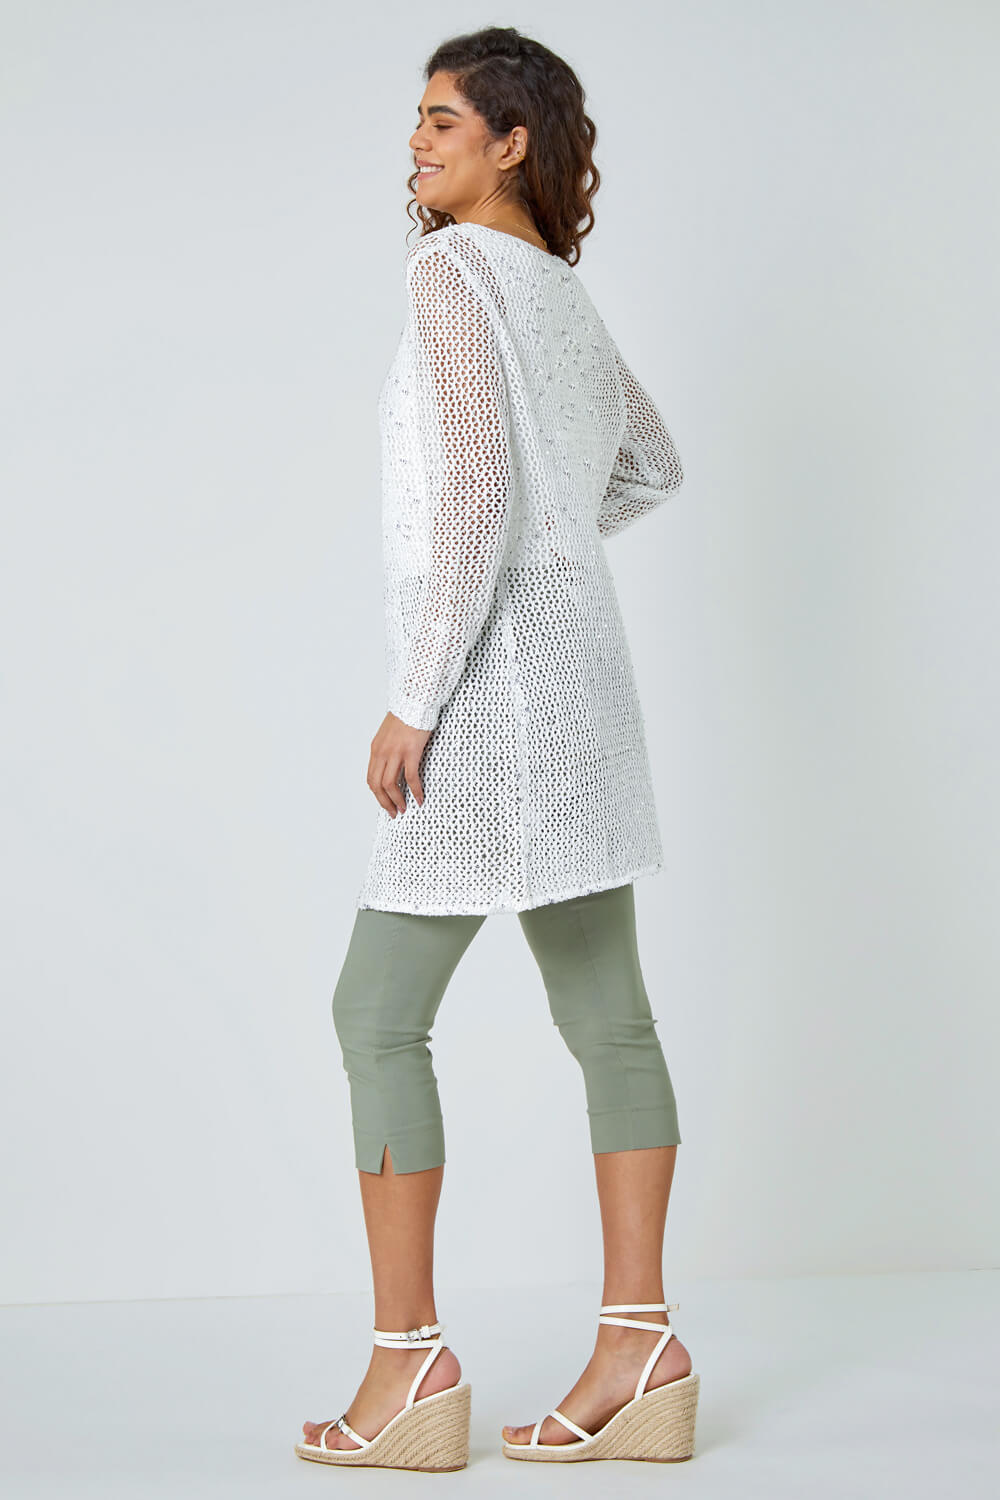 White Sequin Knit Longline Cardigan, Image 3 of 5